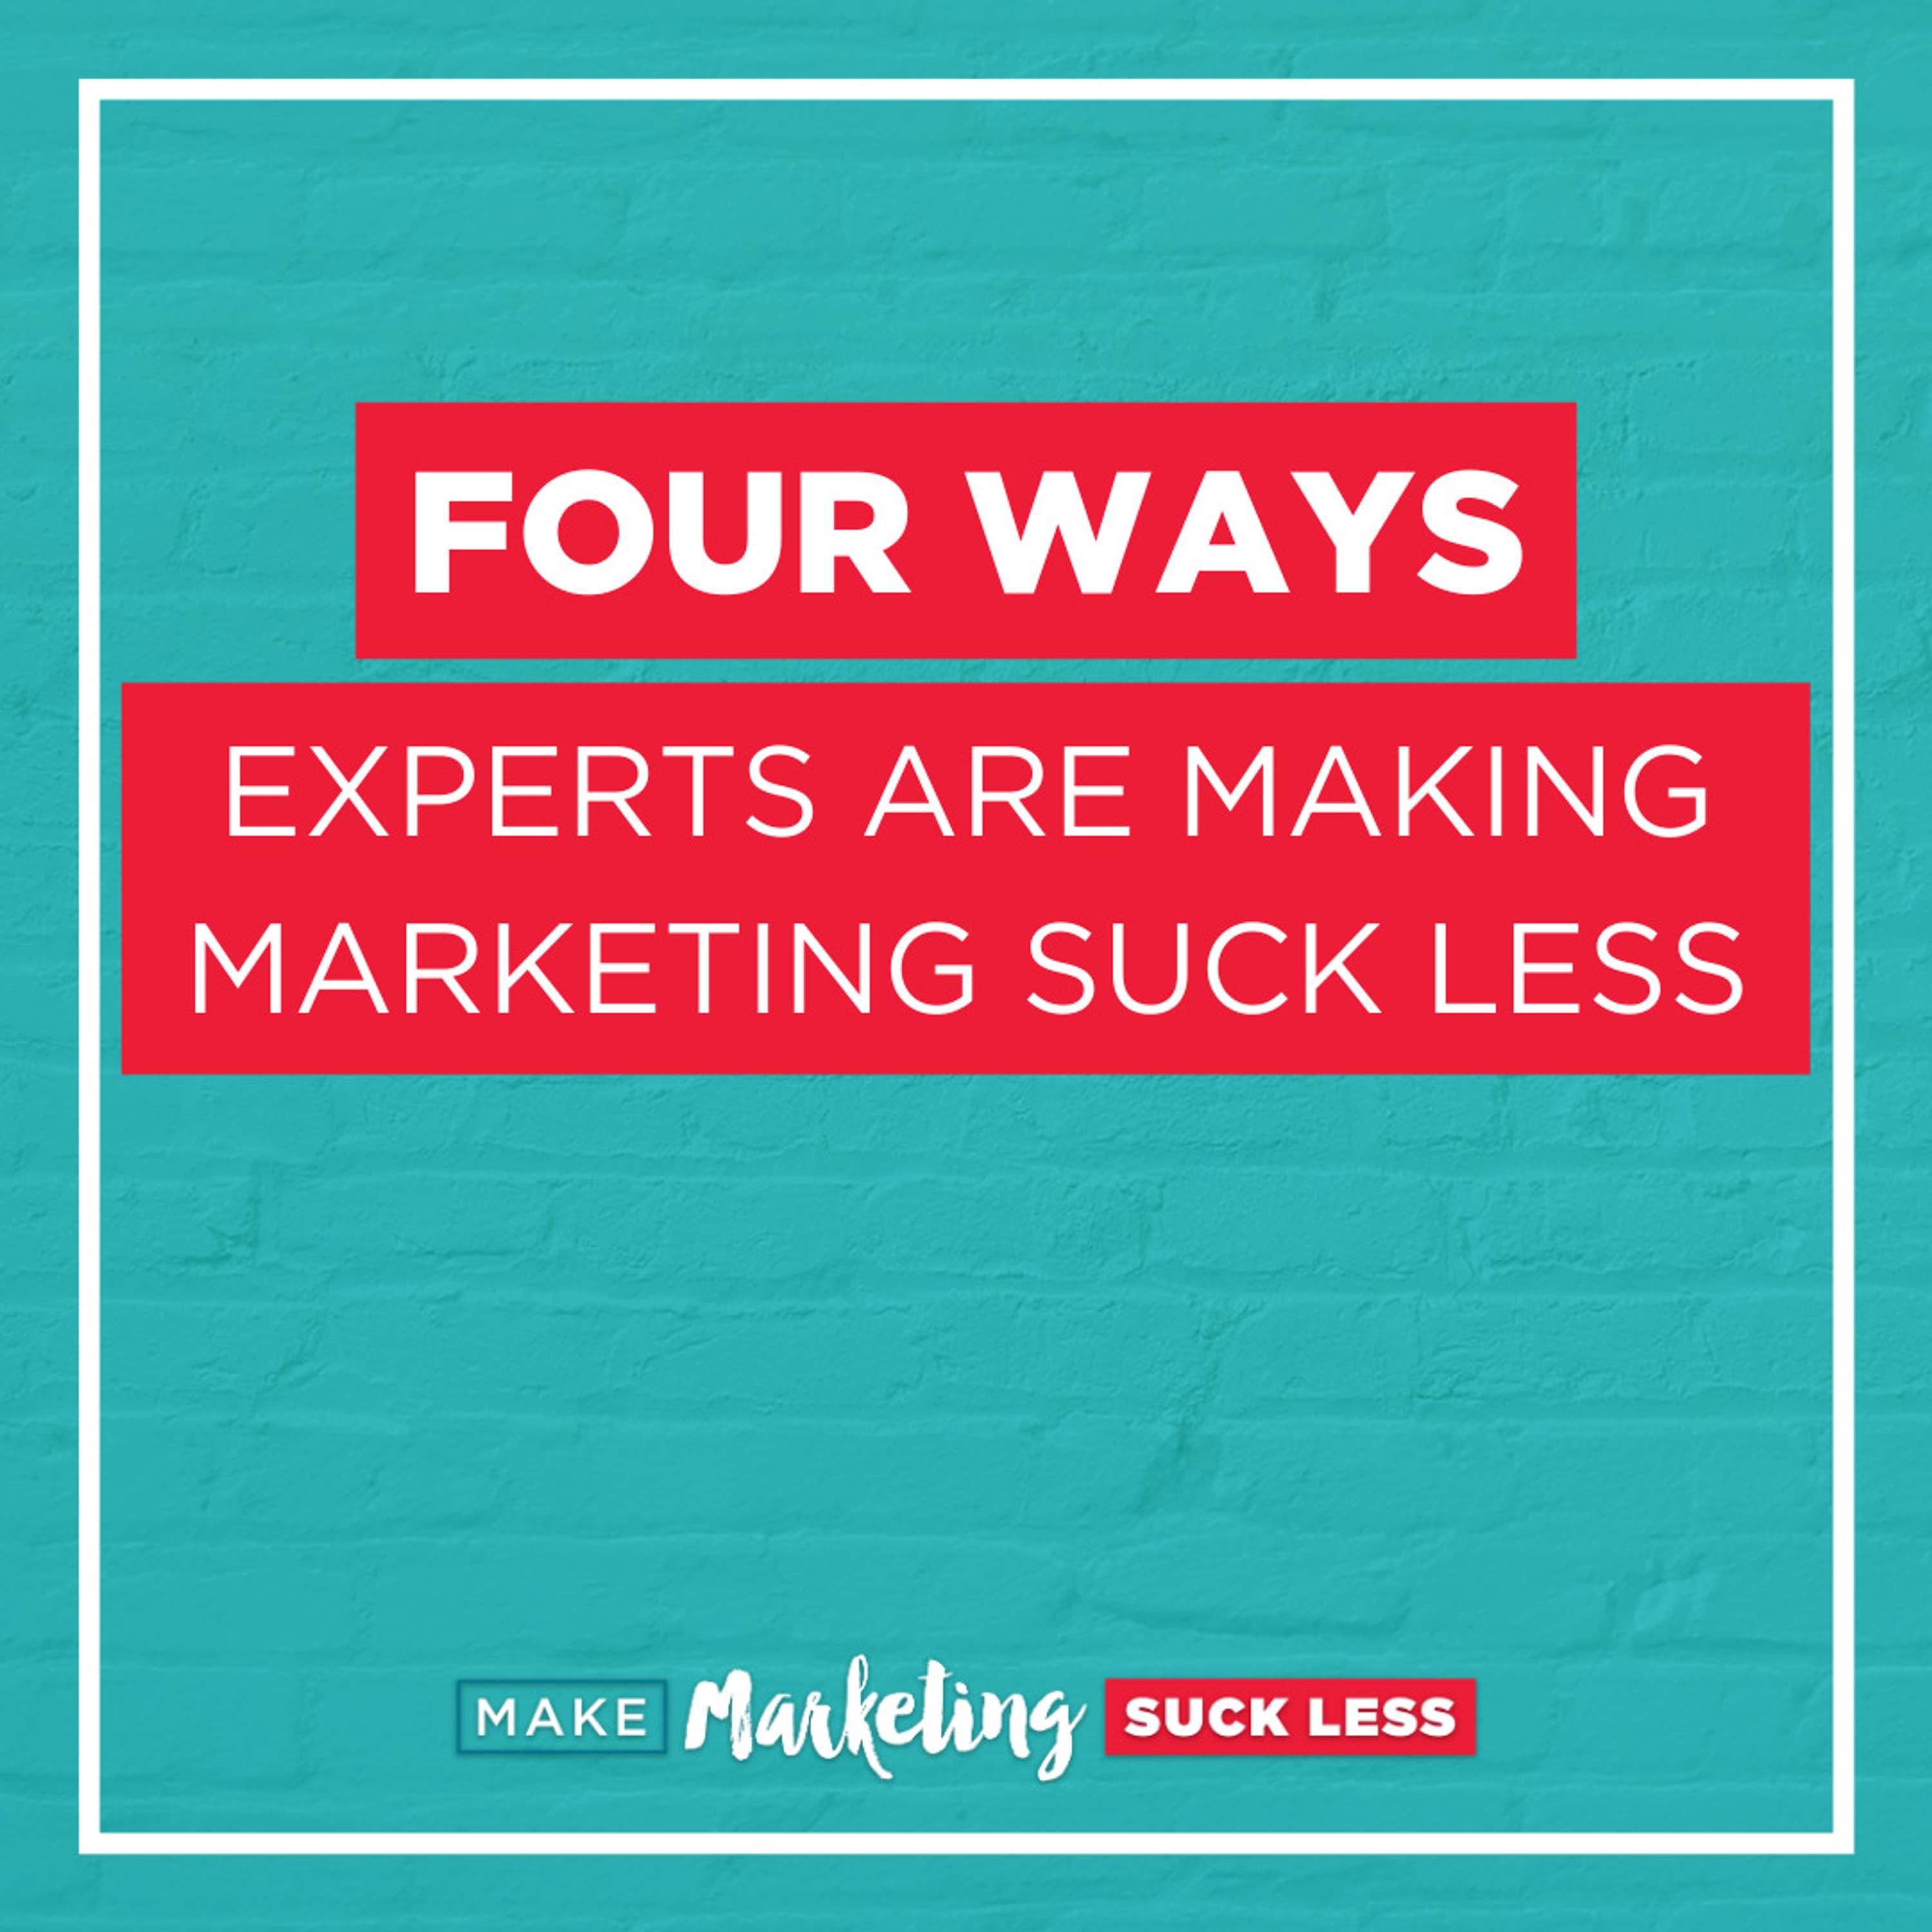 Four Ways Experts Are Making Marketing Suck Less